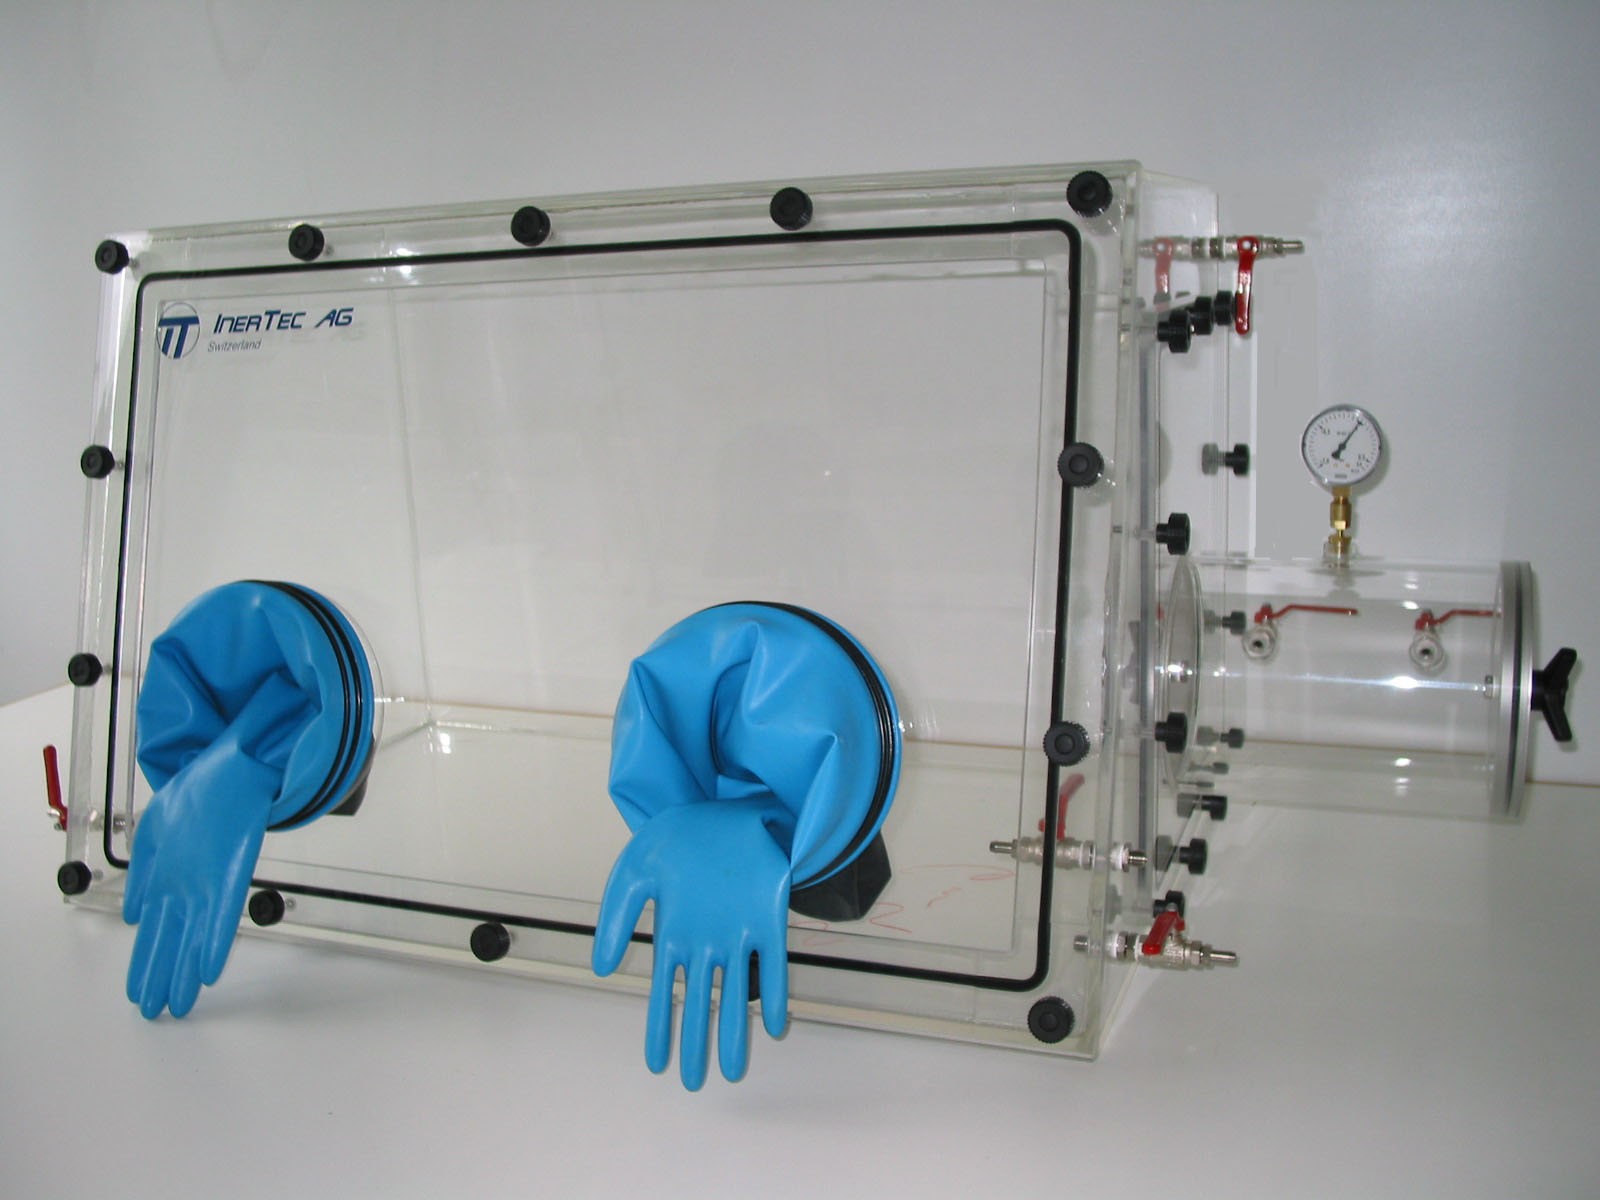 Glovebox made of acrylic&gt; Gas filling: automatic flushing with pressure control, front version: removable, side version: flange, removable, control: oxygen regulator and humidity display with data logger